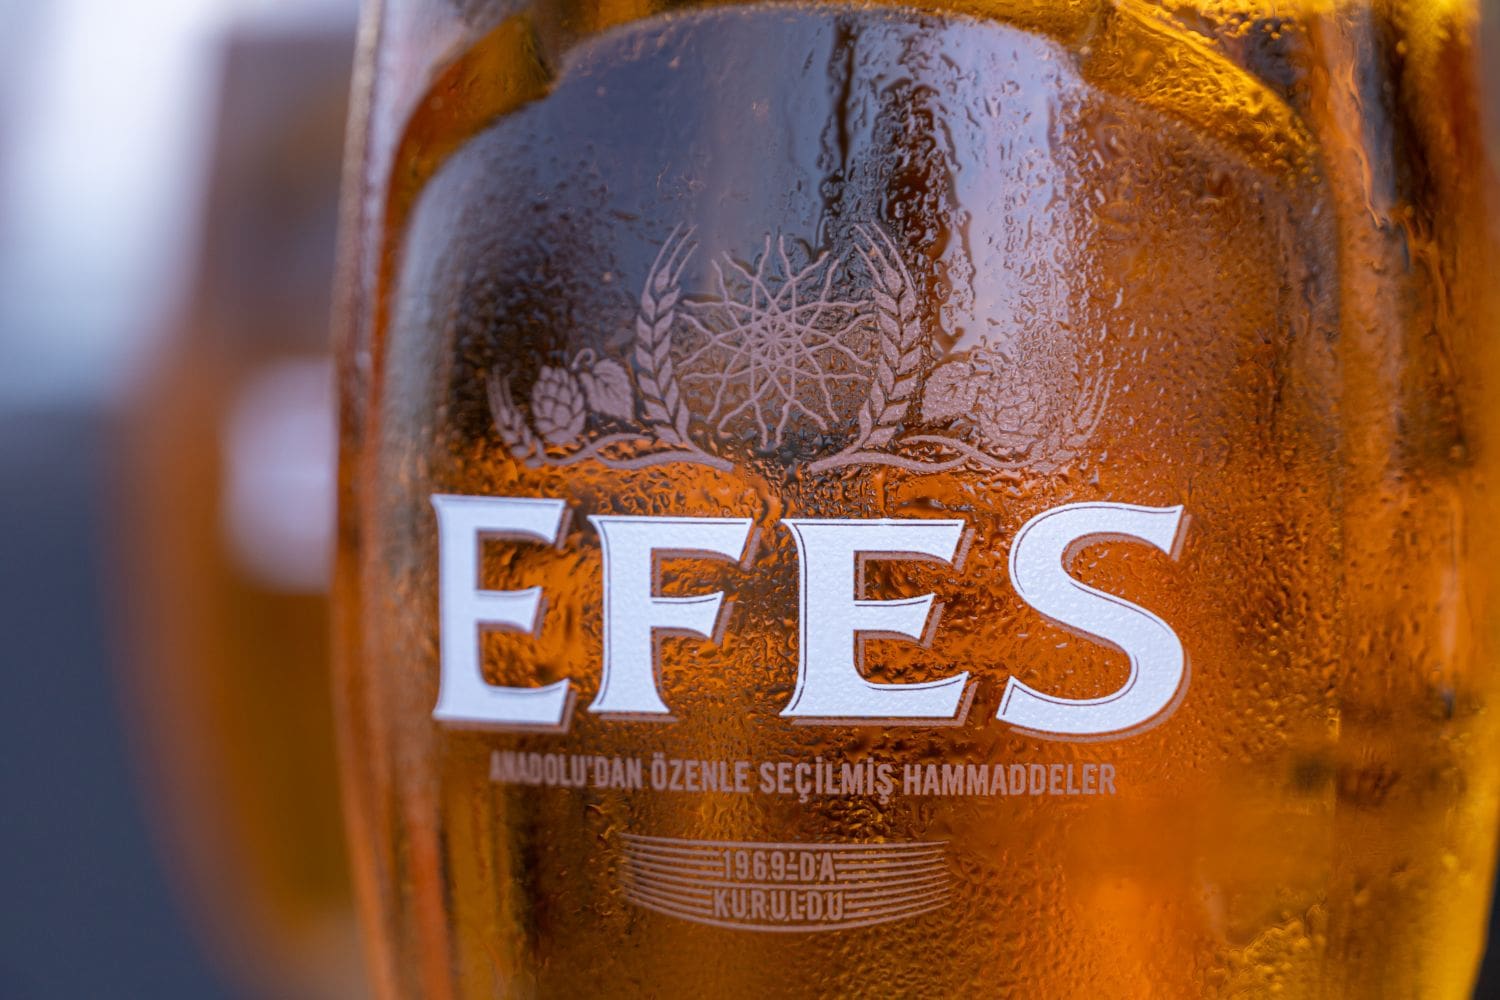 What is the drinking age in Turkey - An up close shot of an efes beer